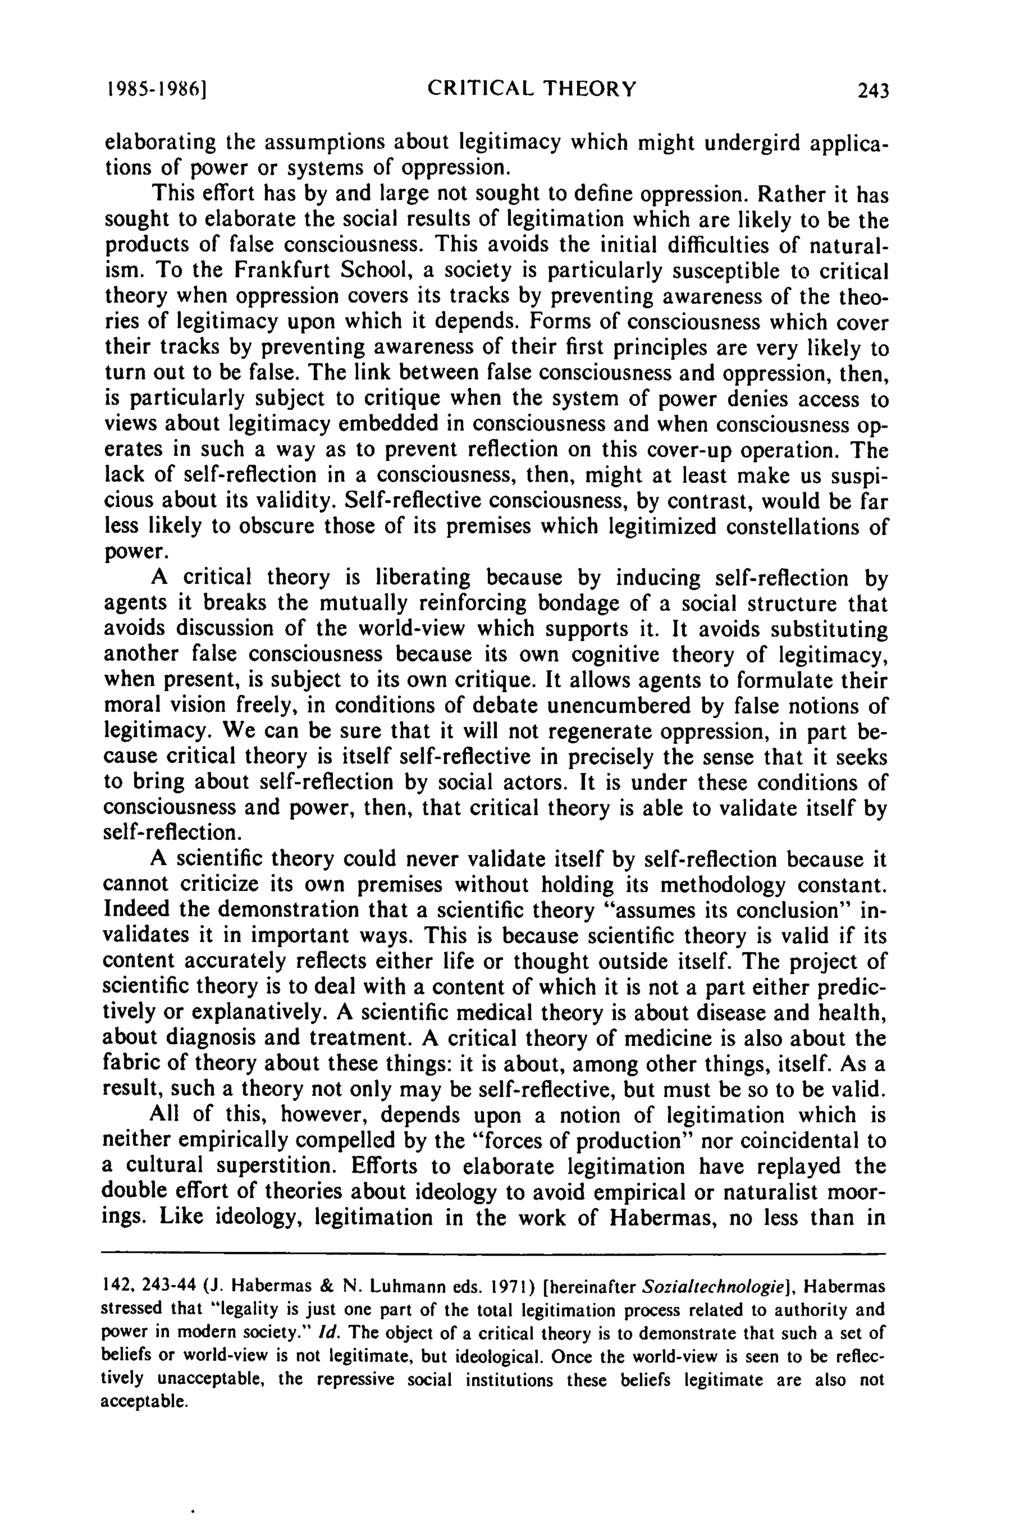 1985-1986] CRITICAL THEORY elaborating the assumptions about legitimacy which might undergird applications of power or systems of oppression.